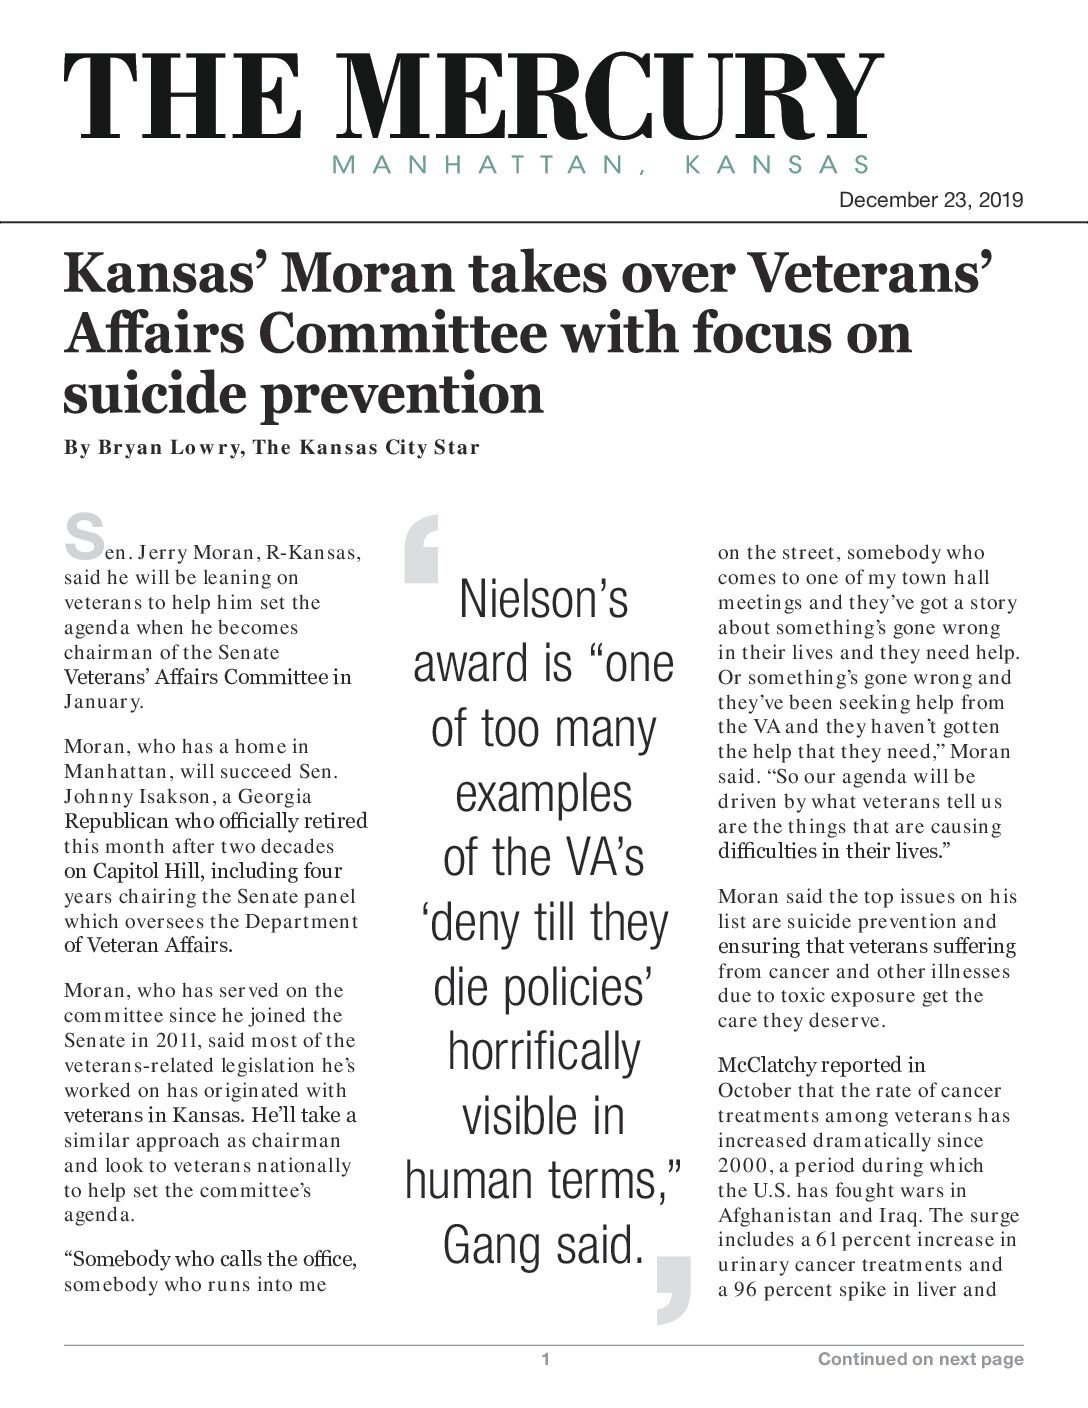 Kansas’ Moran takes over Veterans’ Affairs Committee with focus on suicide prevention